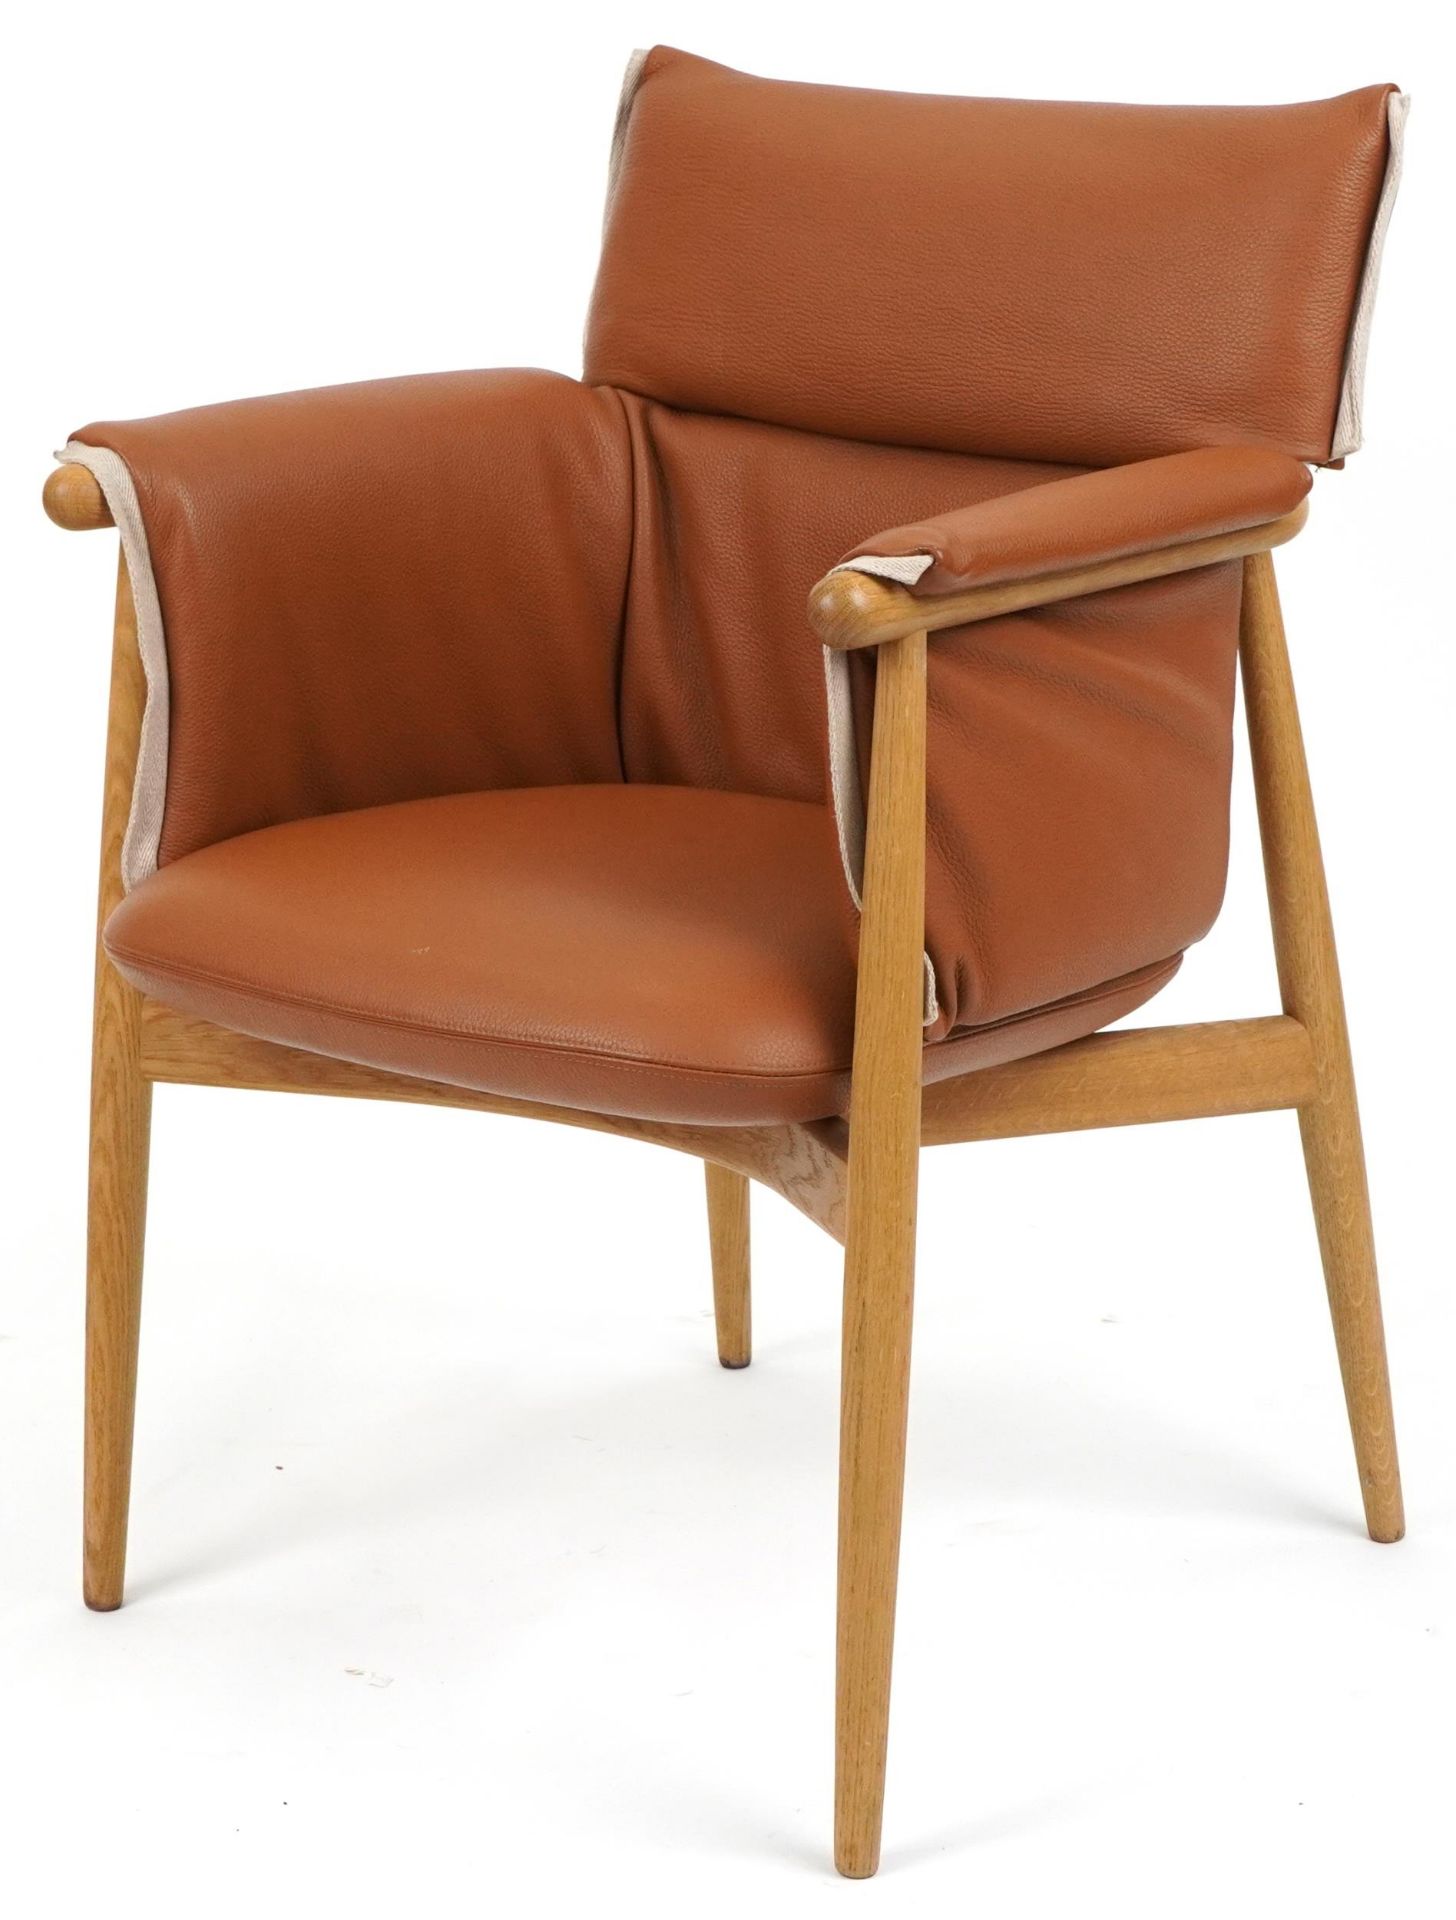 Carl Hansen & Son, Danish lightwood and brown leather upholstery embrace armchair, plaque to the